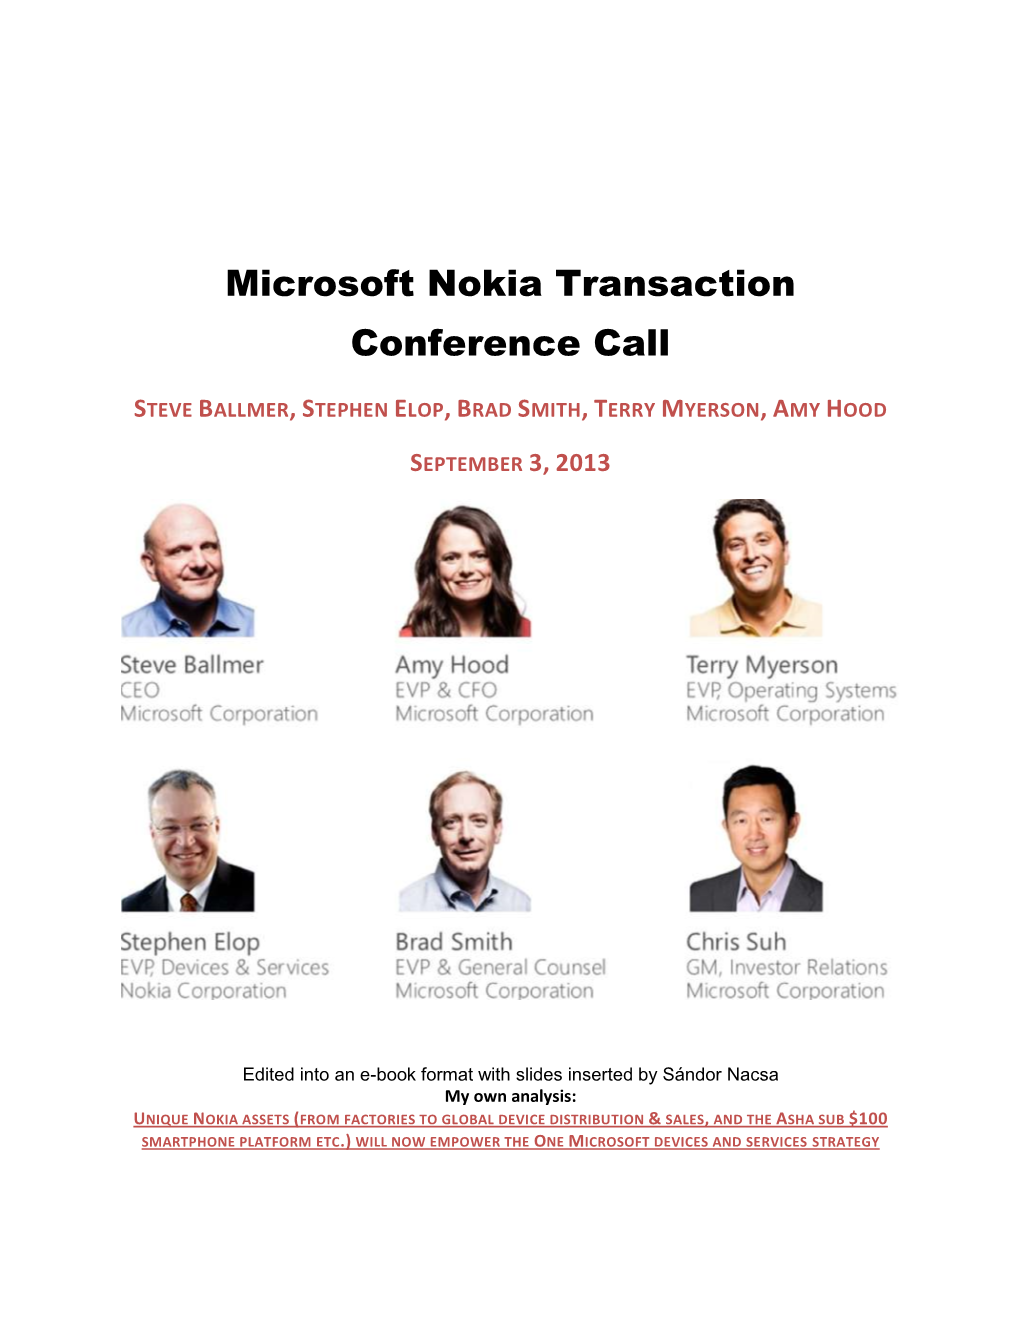 Microsoft Nokia Transaction Conference Call with Slides From